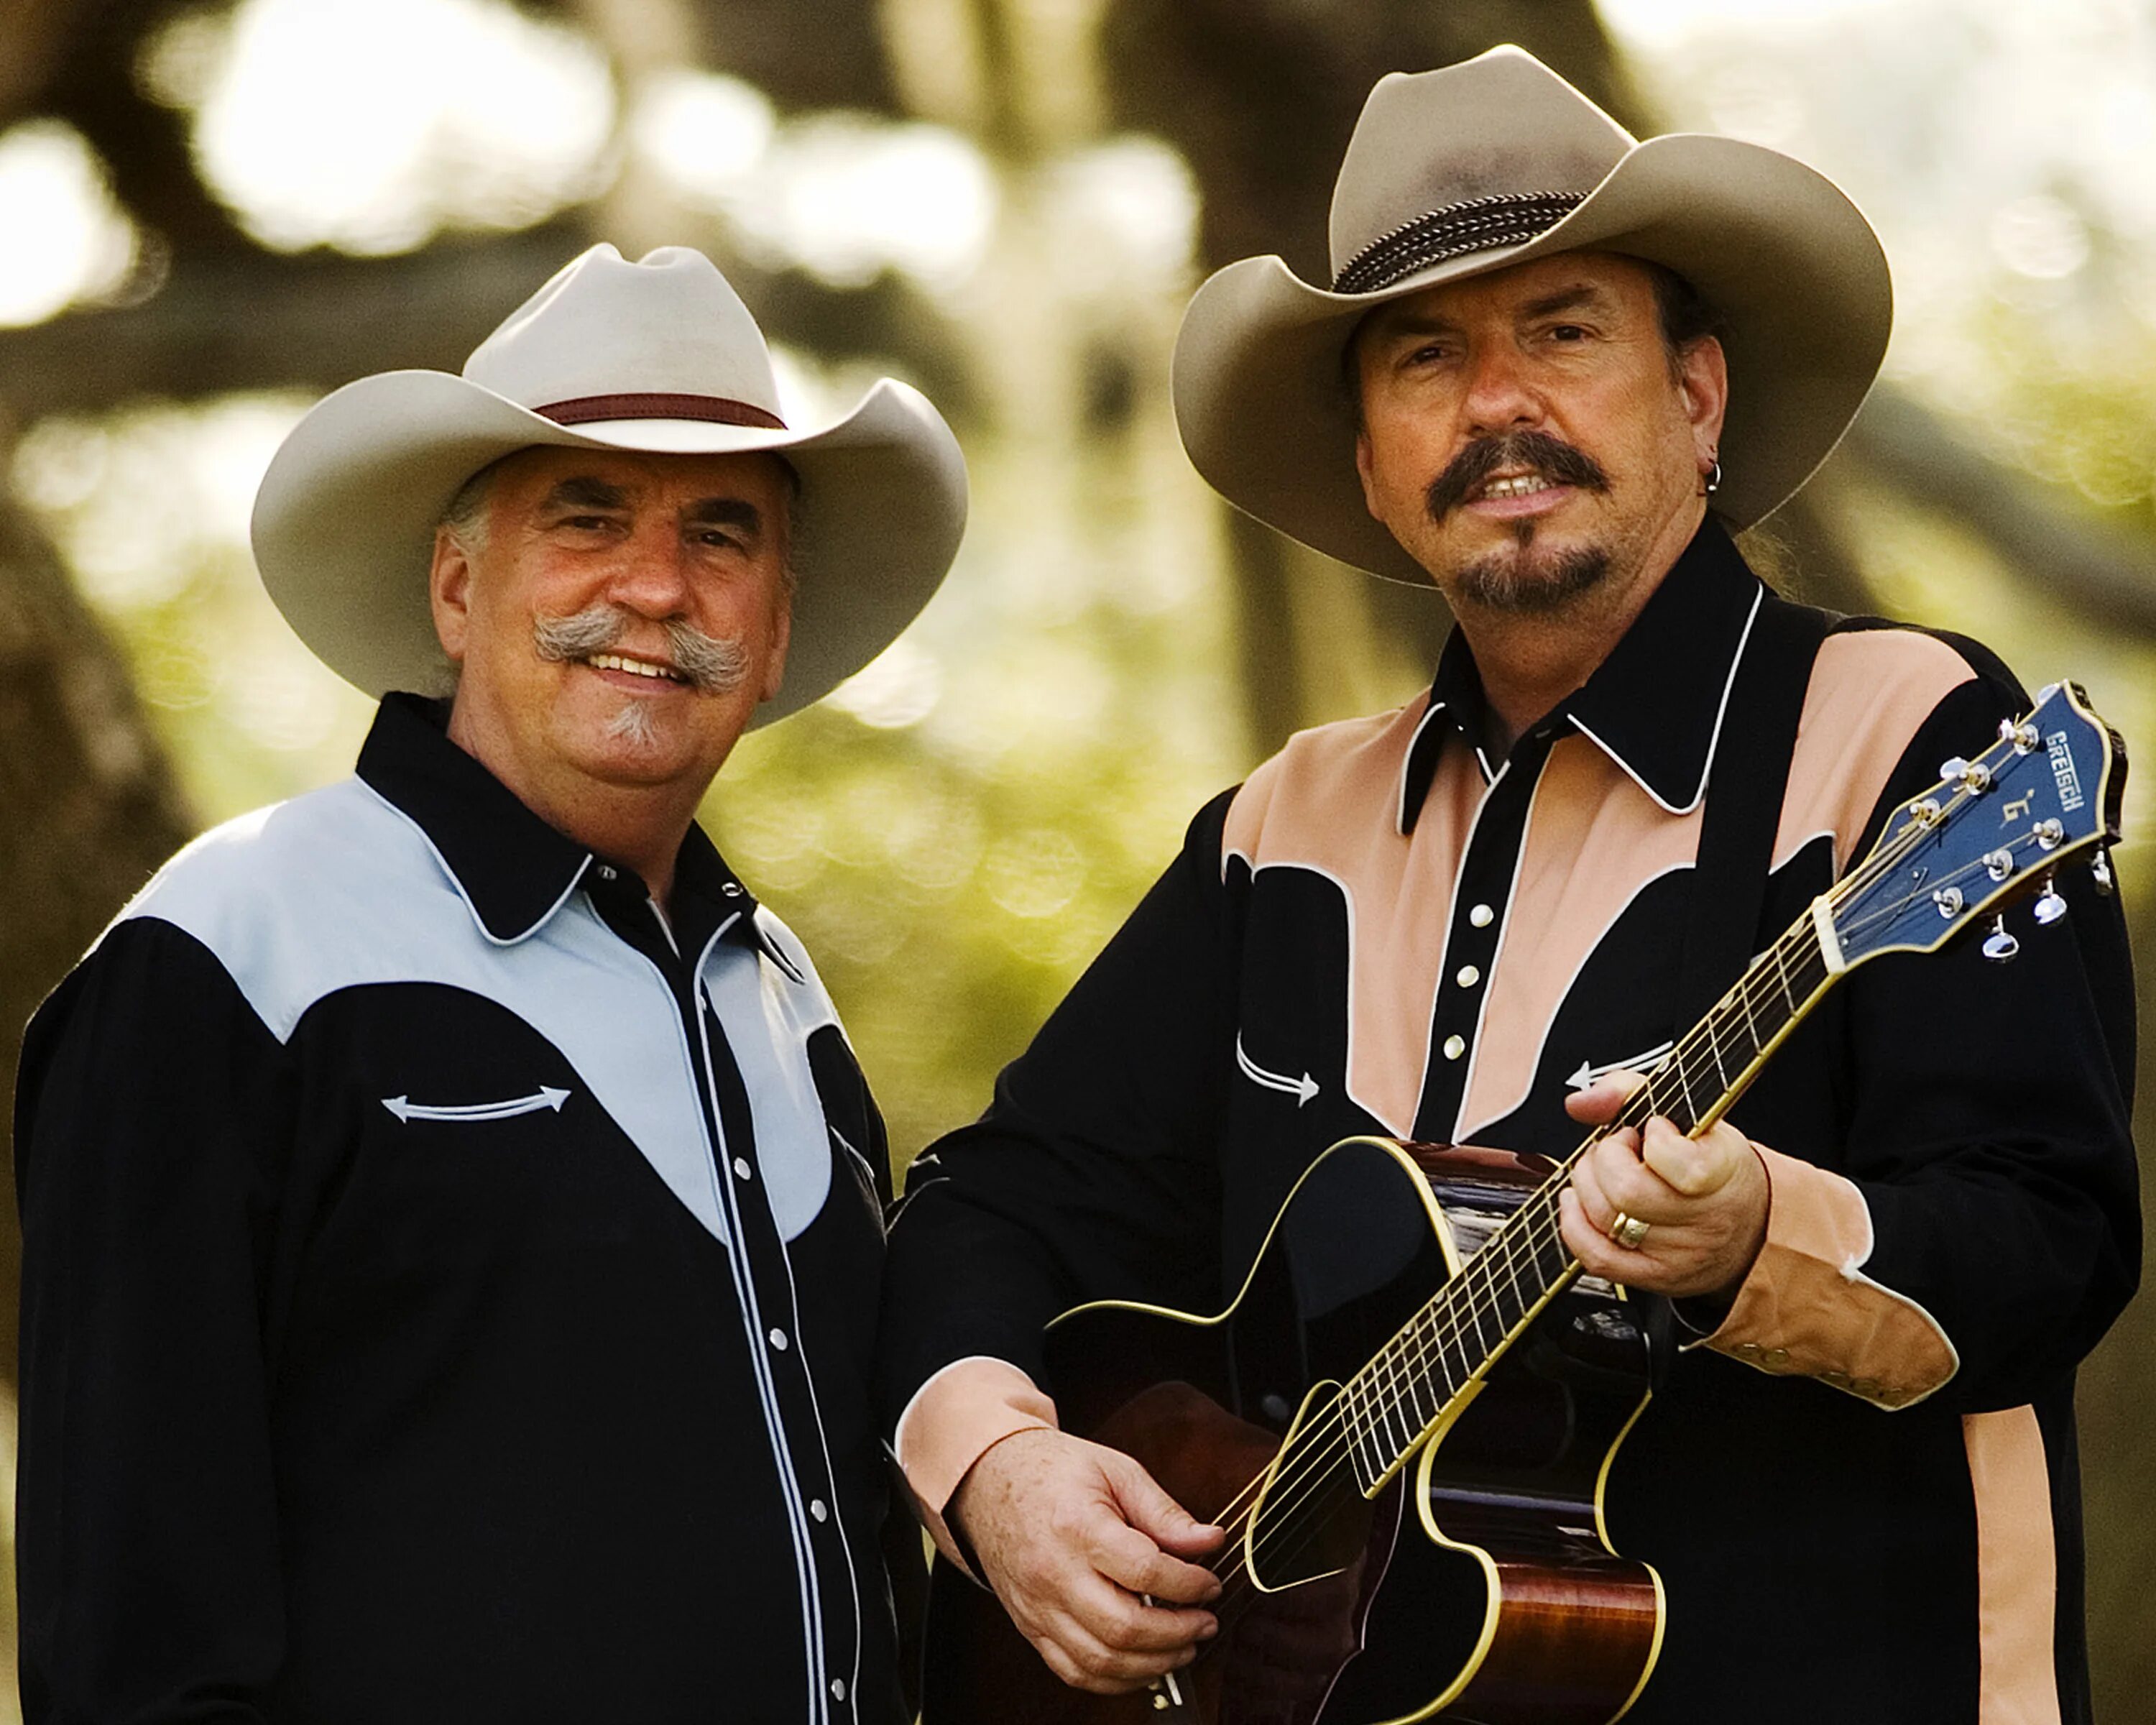 Brothers country. The Bellamy brothers. Bellamy brothers CD. Bellamy brothers 2021 Covers from the brothers. No Country Music for old men Bellamy brothers.